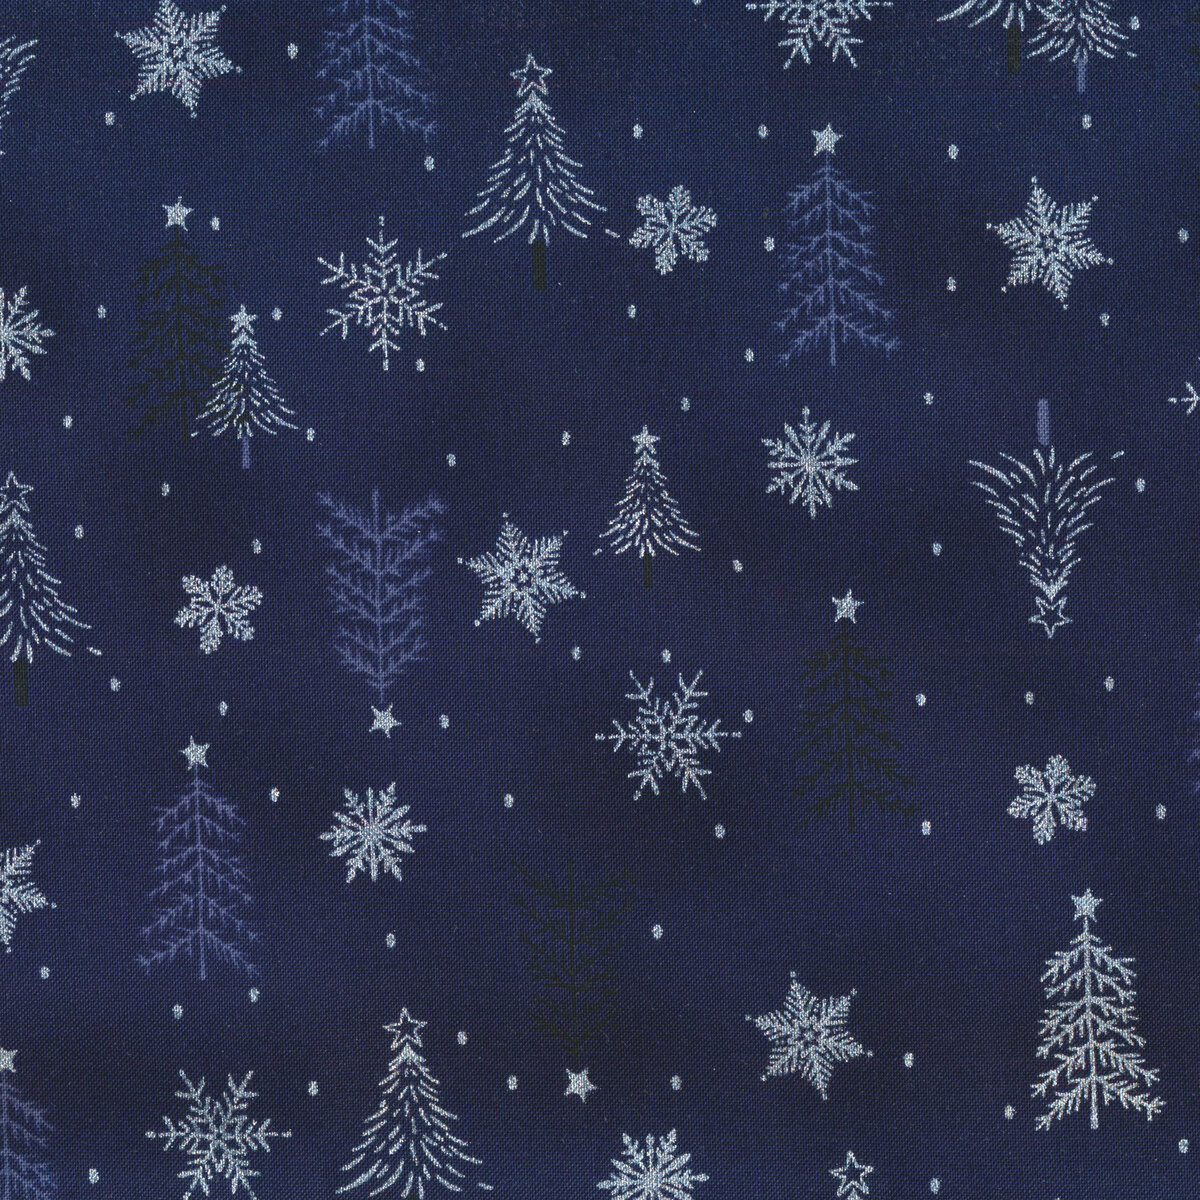 Snowy Silver Snowflakes on Iridescent Blue and Silver Background · Creative  Fabrica